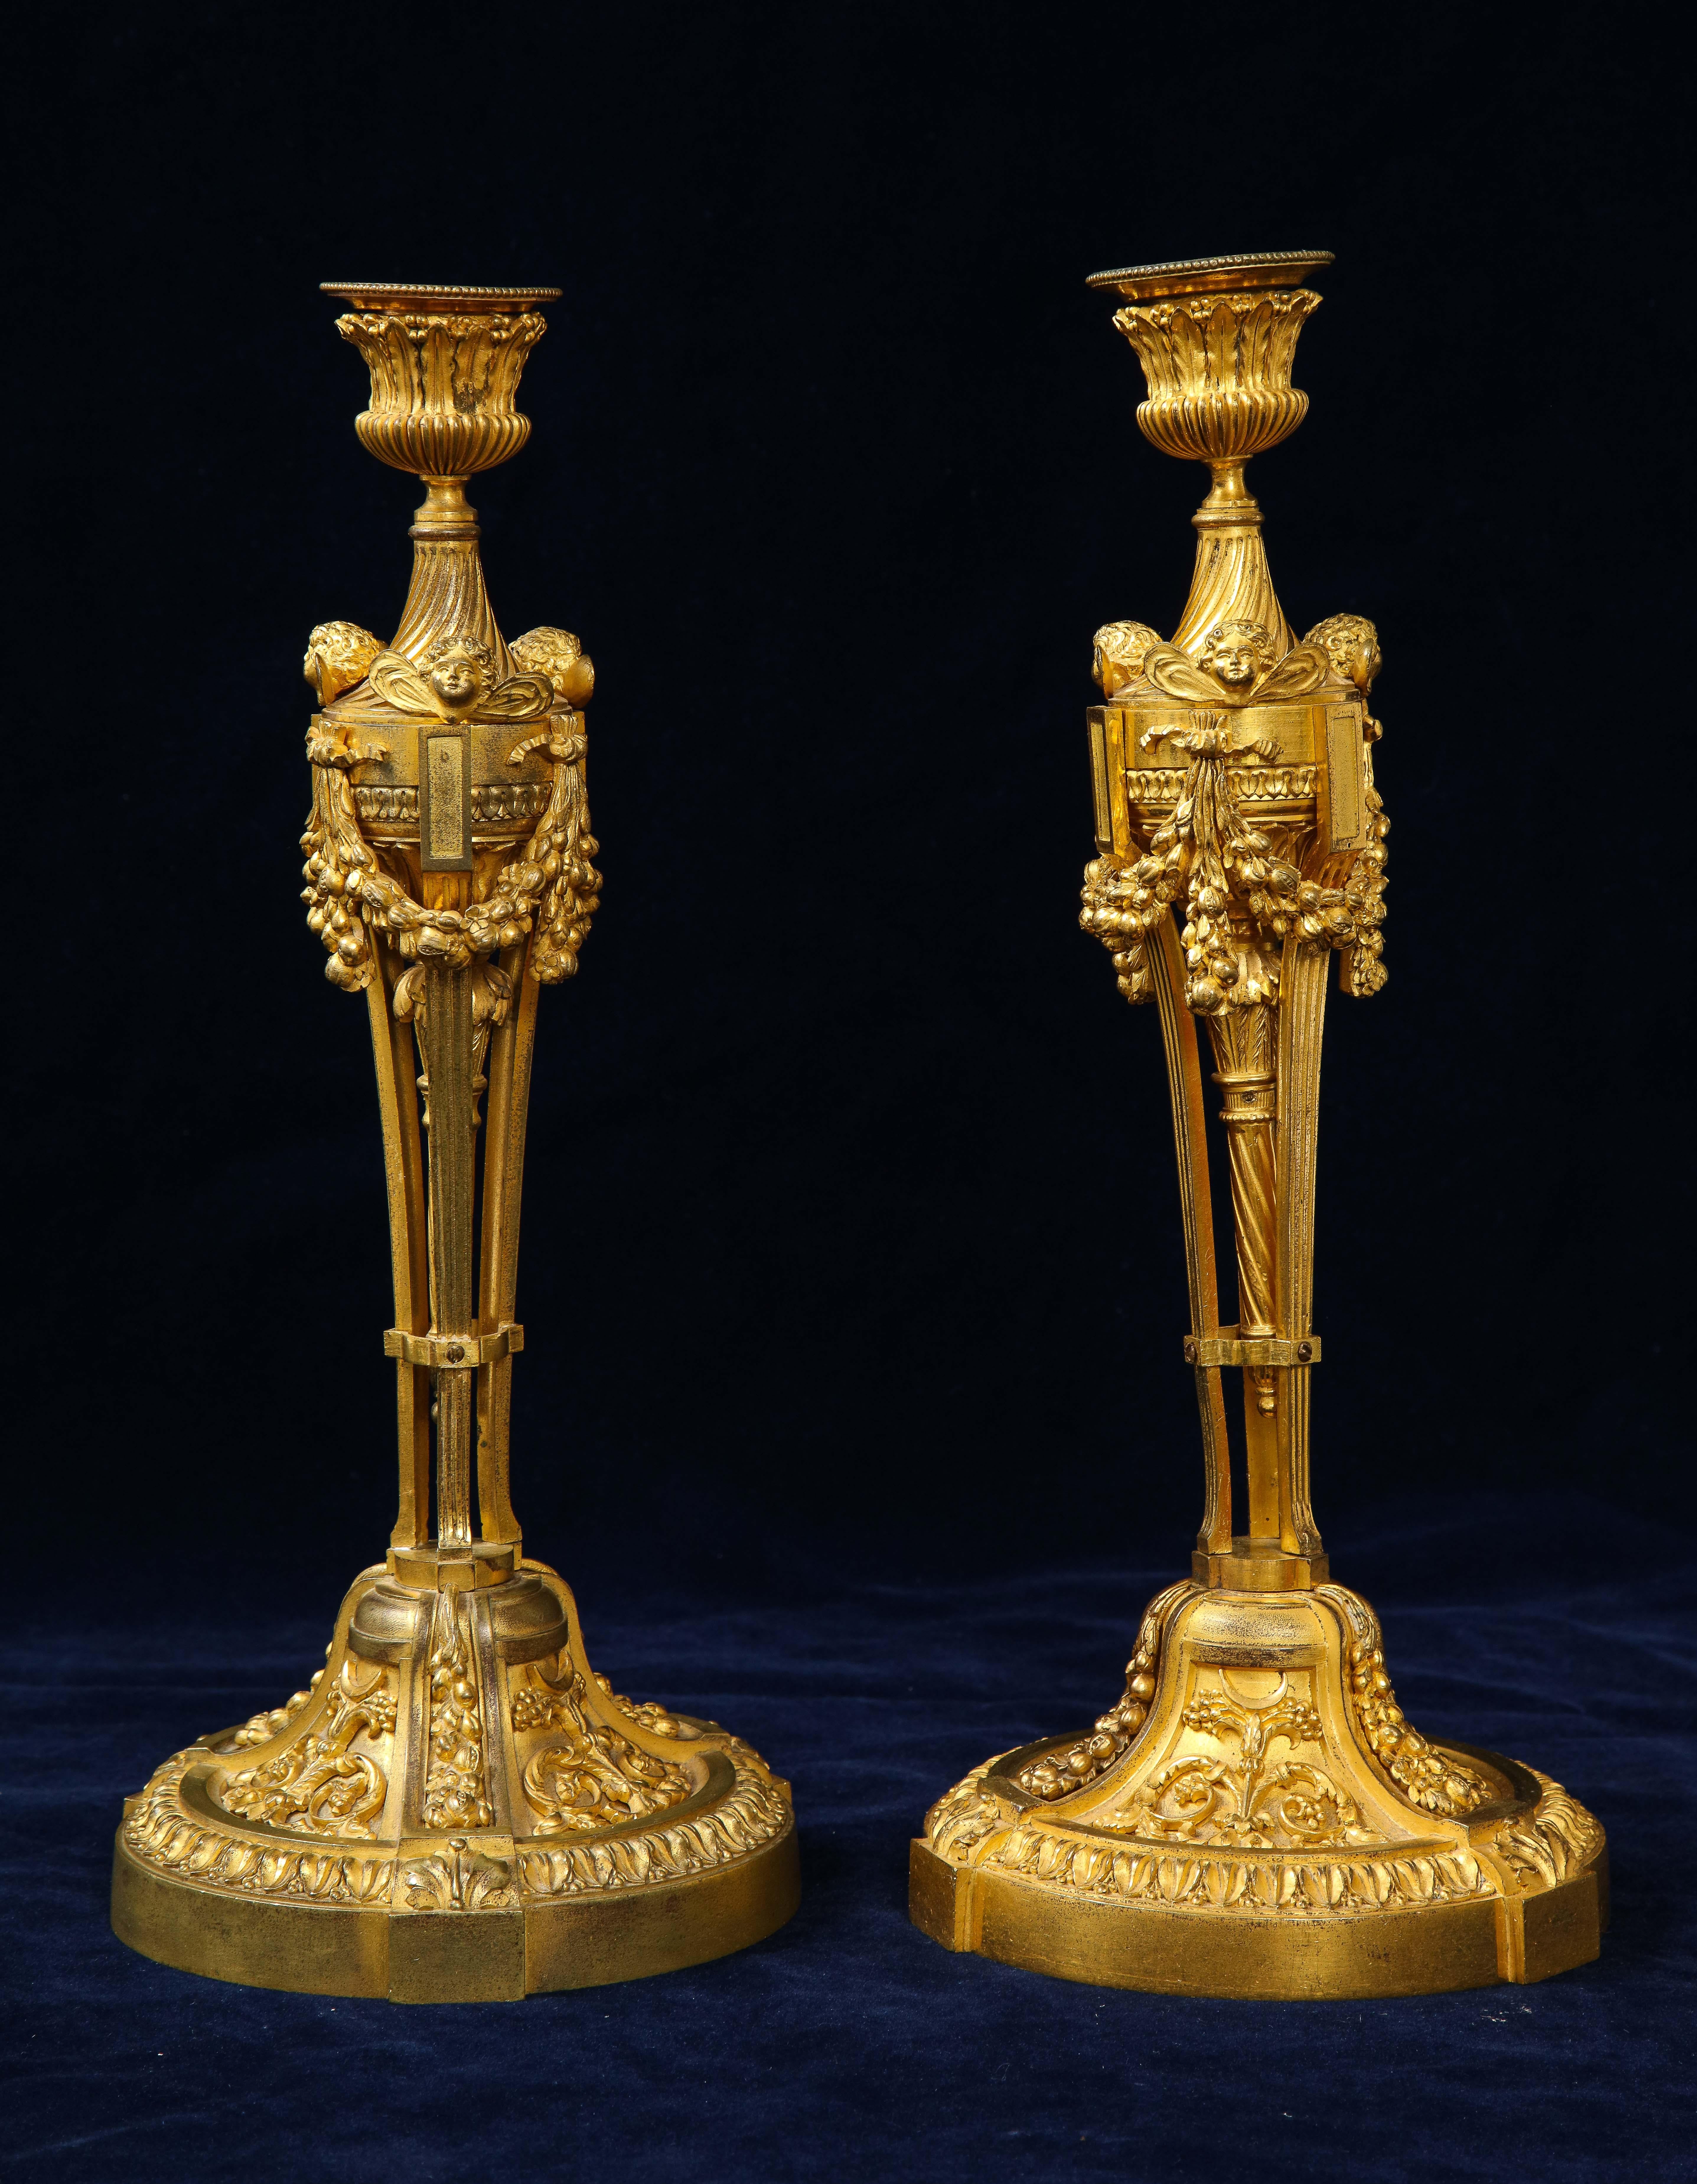 Louis XVI Pair of French Louid xvi Ormolu Candlesticks with Putti Masks and Garlands For Sale